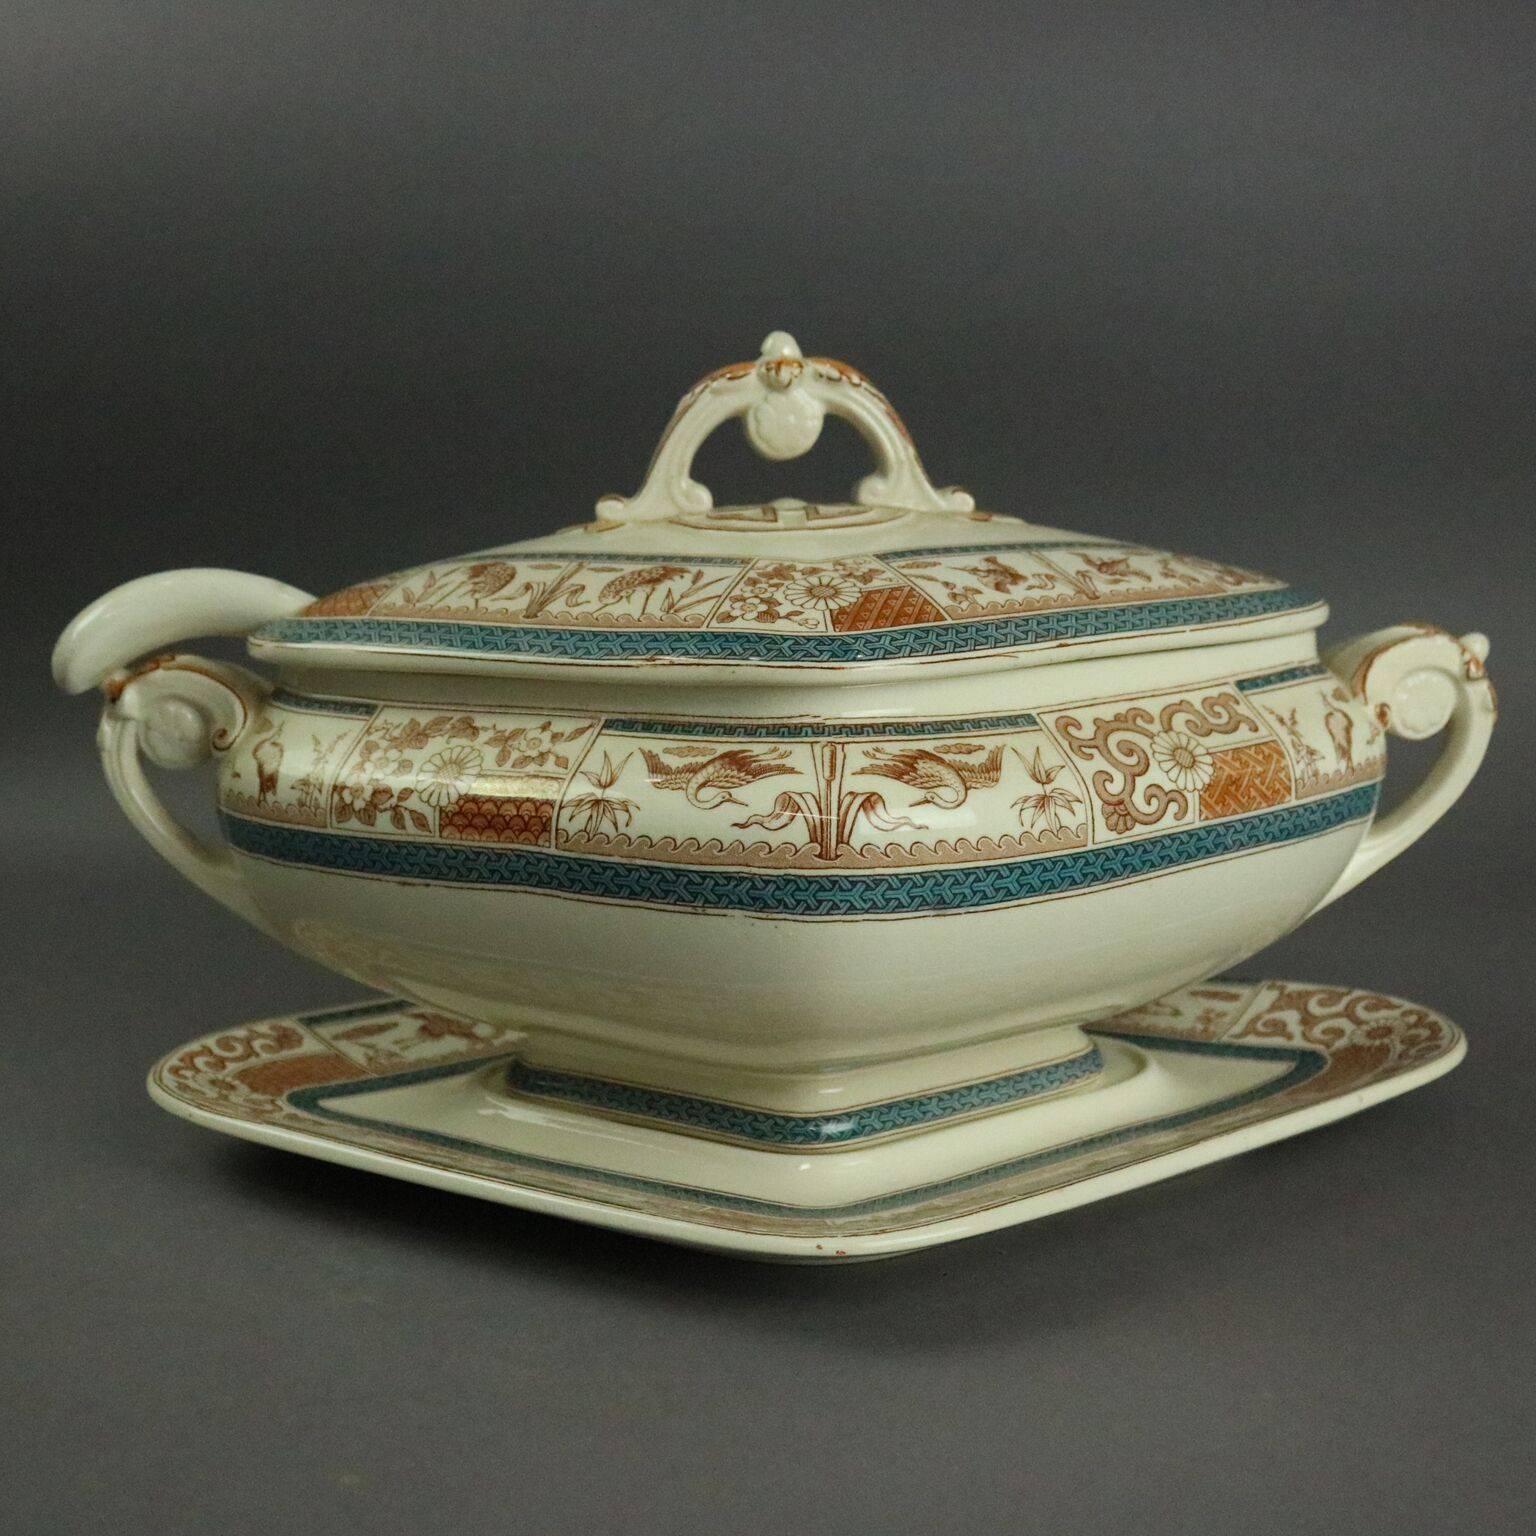 Antique Aesthetic Movement English Staffordshire transferware porcelain lidded tureen features diamond shape, banded foliate design and includes under tray and ladle, circa 1870.

Measures: 9" H X 16" W X 11" D.